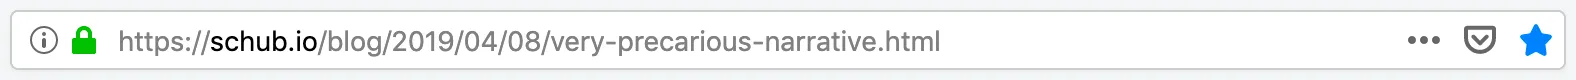 If you are using Firefox, your address bar will look like this.